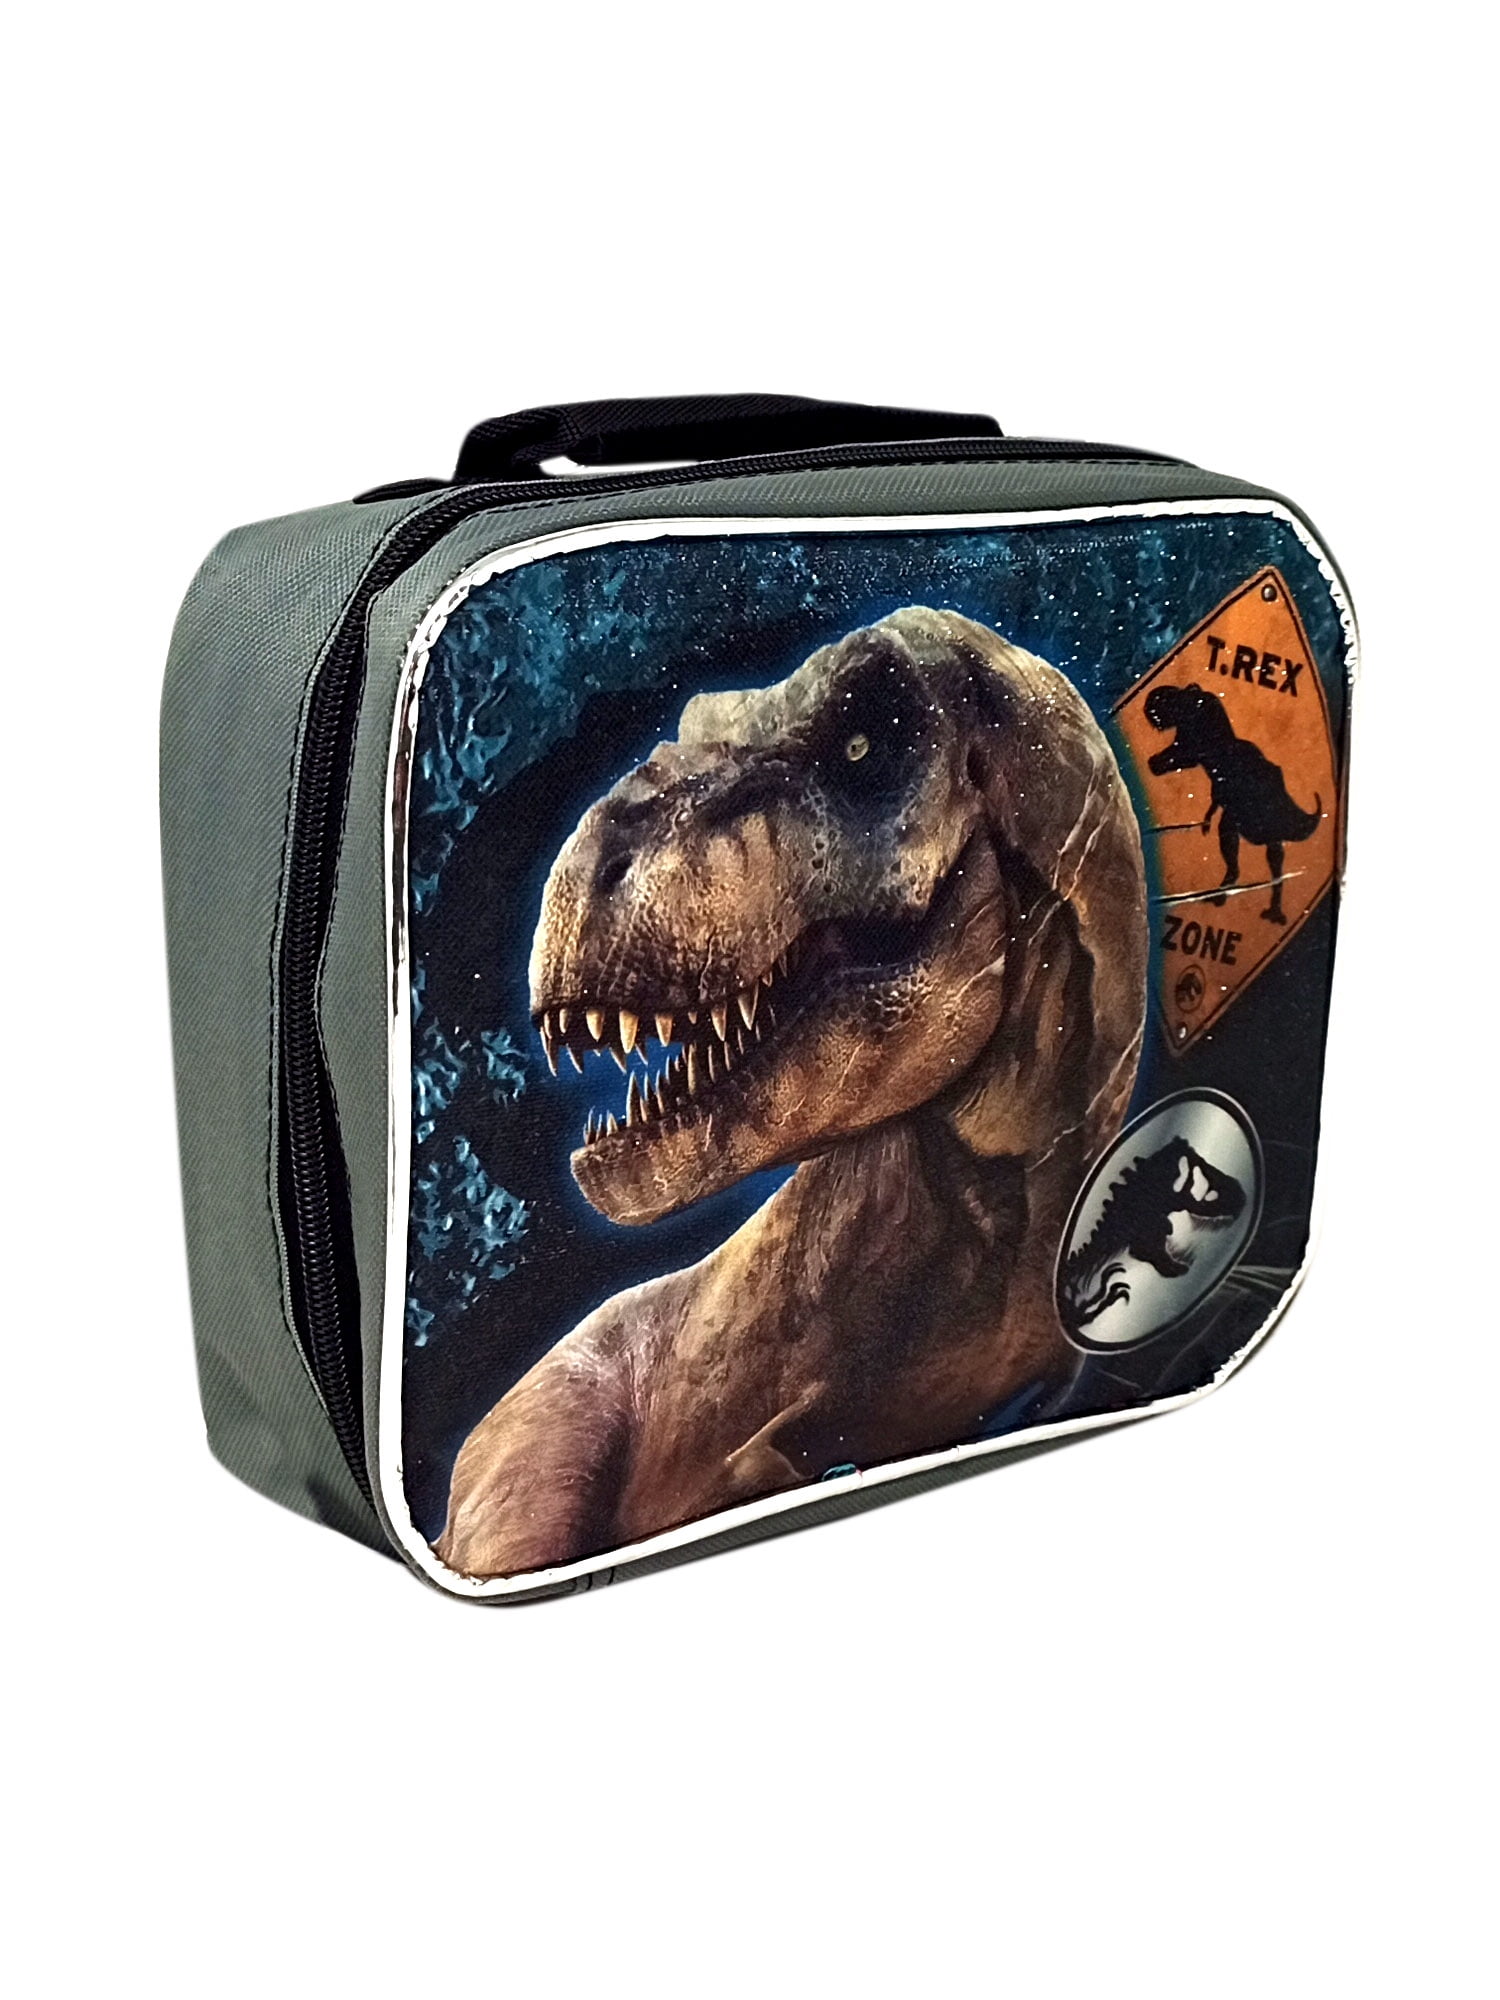 TP-Link zoeo boys dinosaur lunch box 3d insulated lunch bag prep kids  cooler blue tote freezable shoulder strap waterproof picnic meal